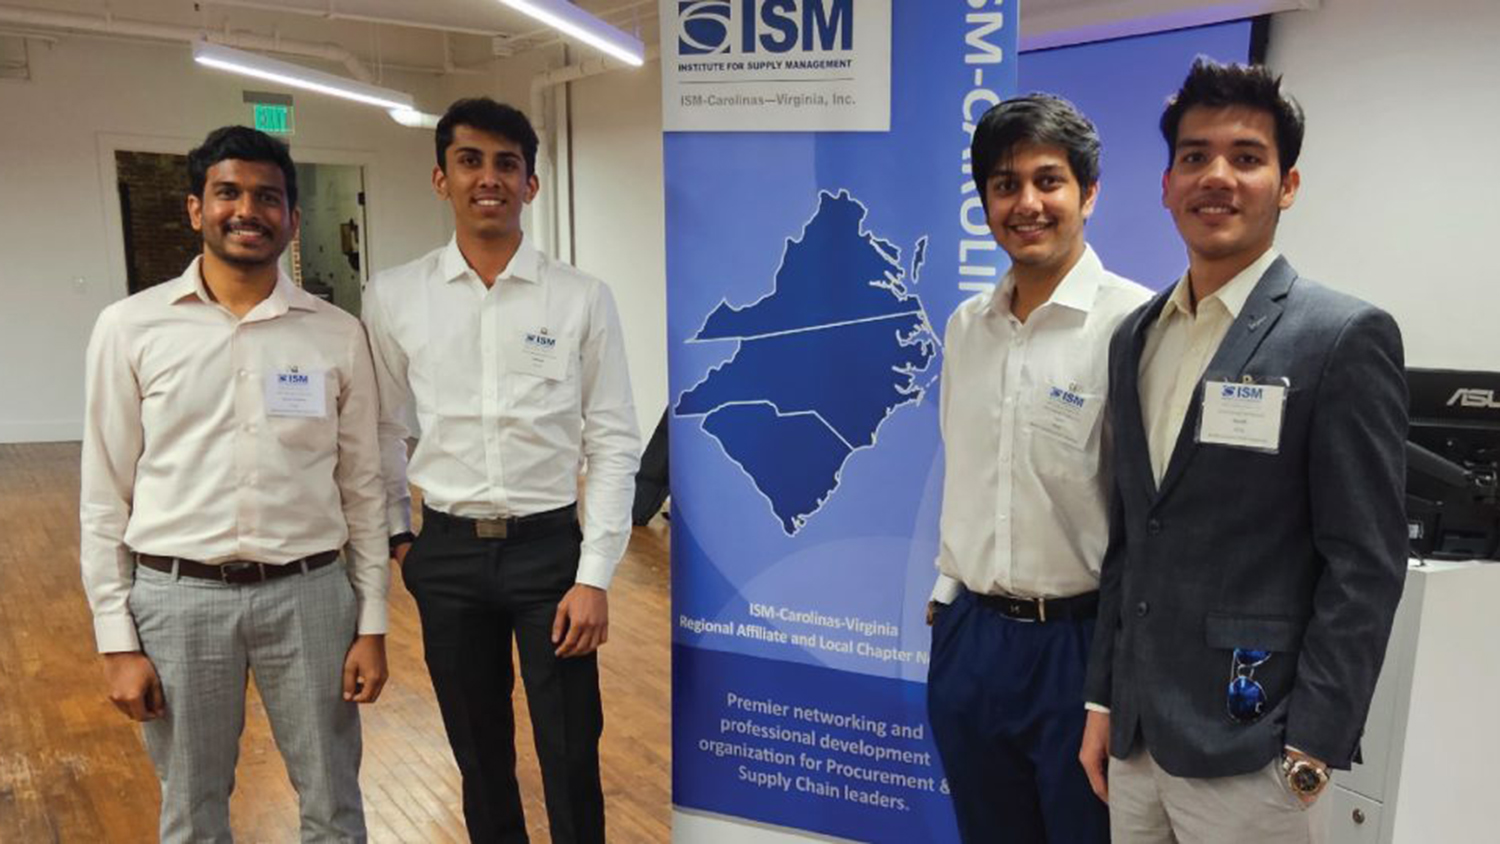 From left: Vamsi Engu, Aakash Dhruv, Parth Aloni and Hardik Birla standing in front of a blue and white ISM banner.